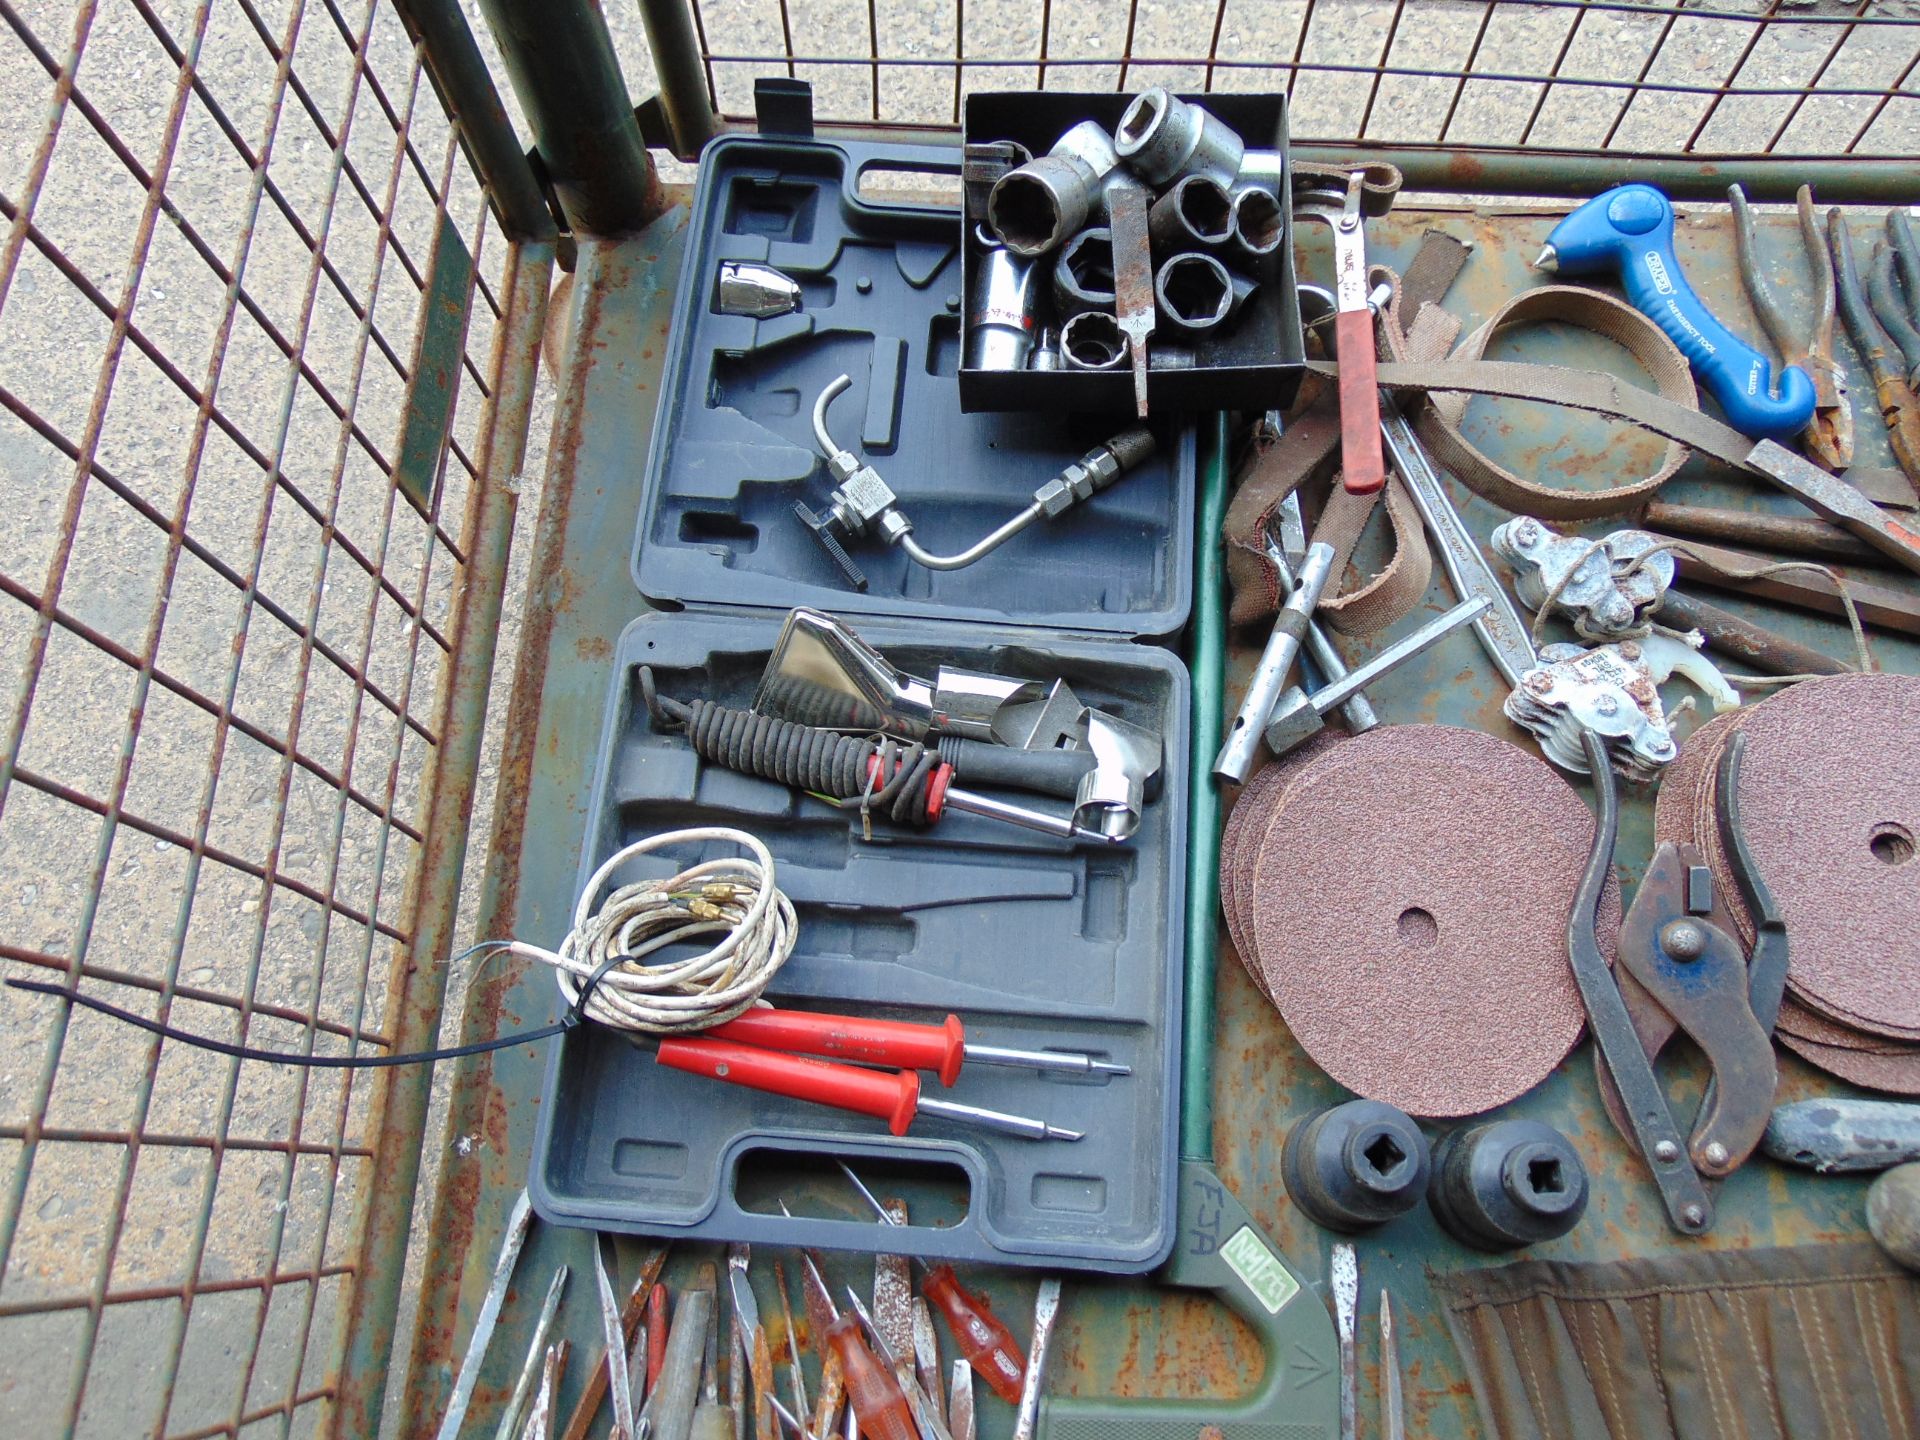 1 x Stillage of Workshop Tools, Spanners, Sockets, Lathe Tools, etc, Approx 120 Items - Image 5 of 9